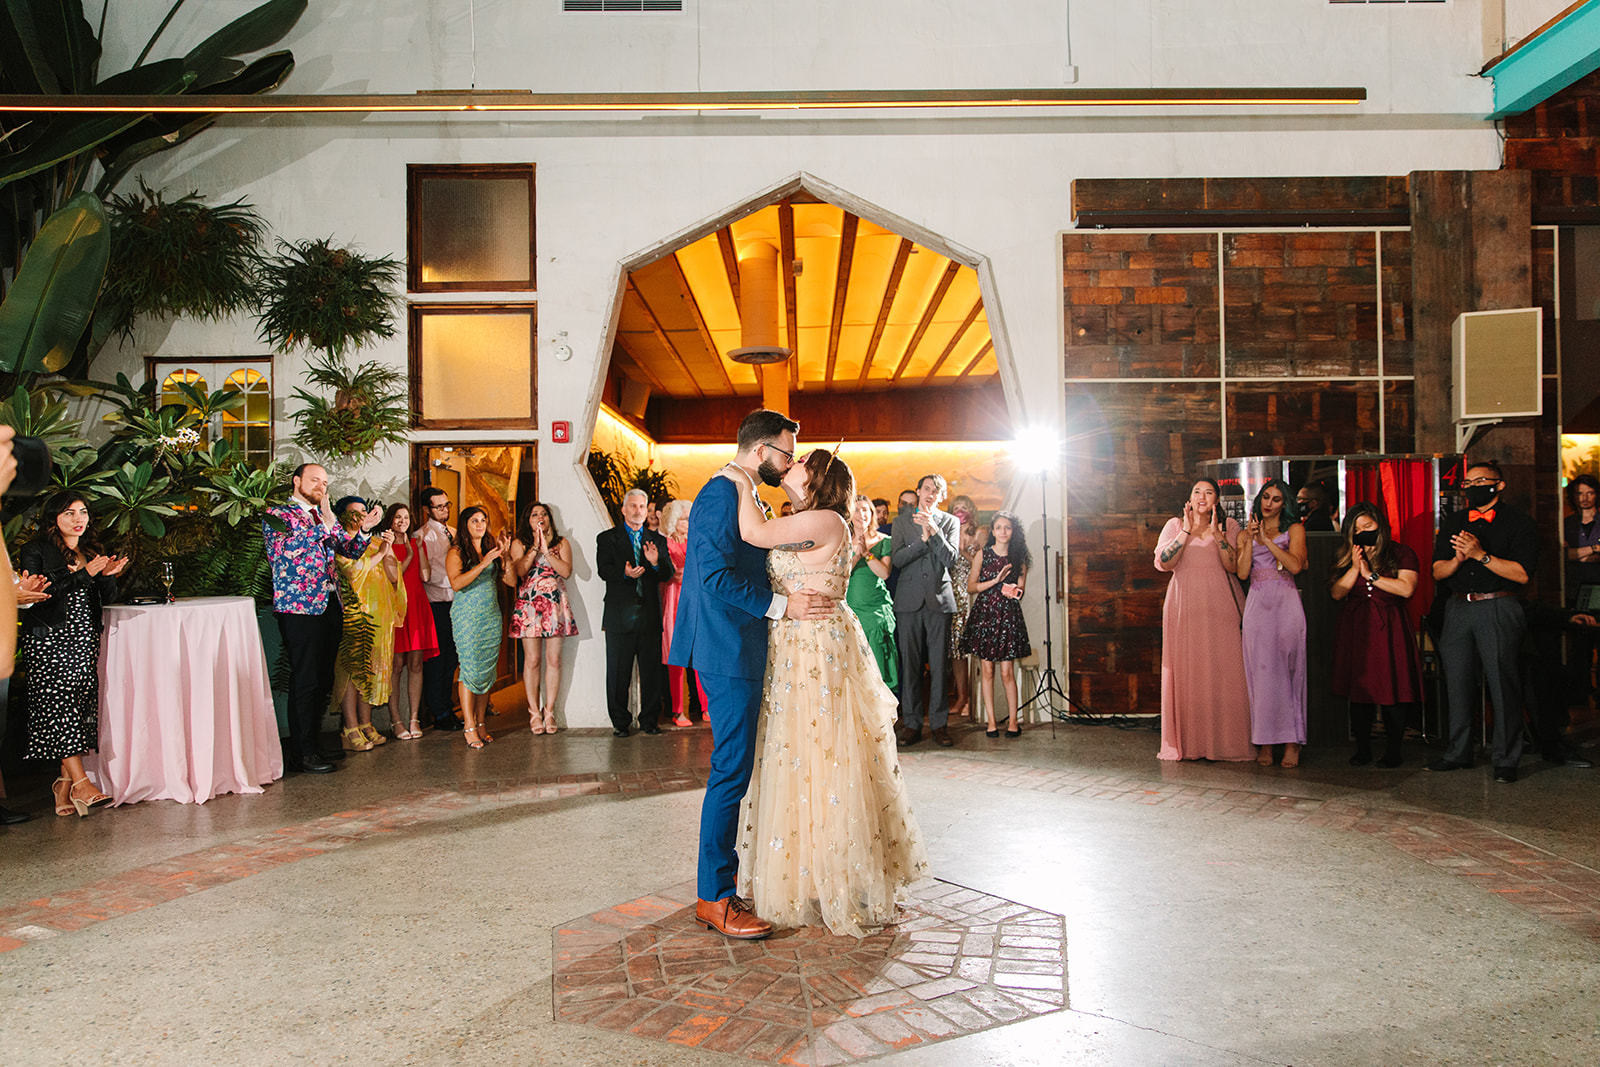 Bride and groom first dance | Colorful Downtown Los Angeles Valentine Wedding | Los Angeles wedding photographer | #losangeleswedding #colorfulwedding #DTLA #valentinedtla   Source: Mary Costa Photography | Los Angeles